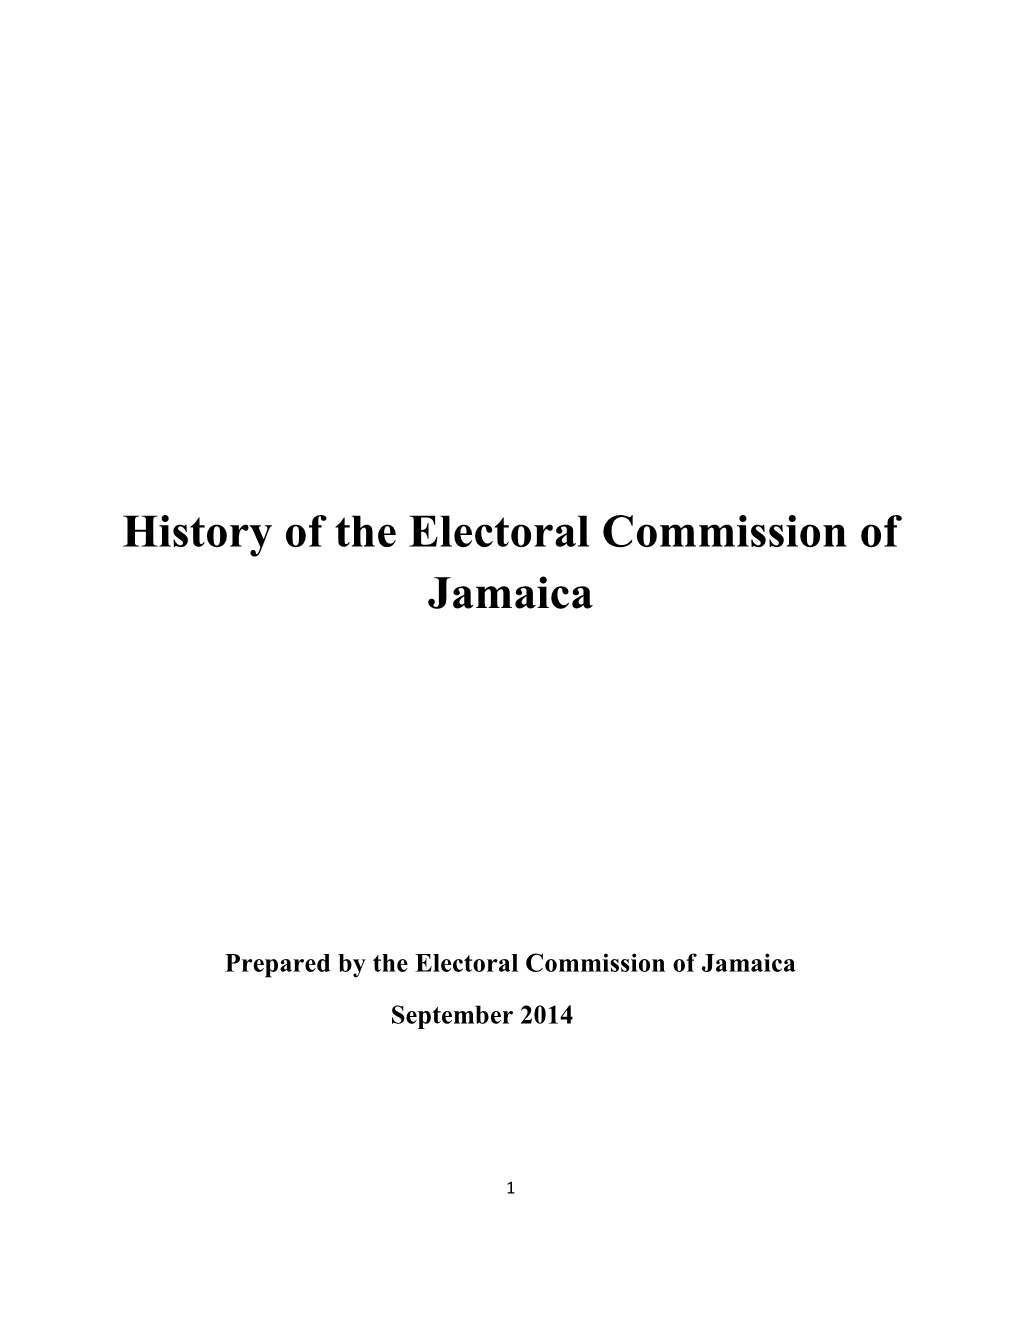 History of the Electoral Commission of Jamaica